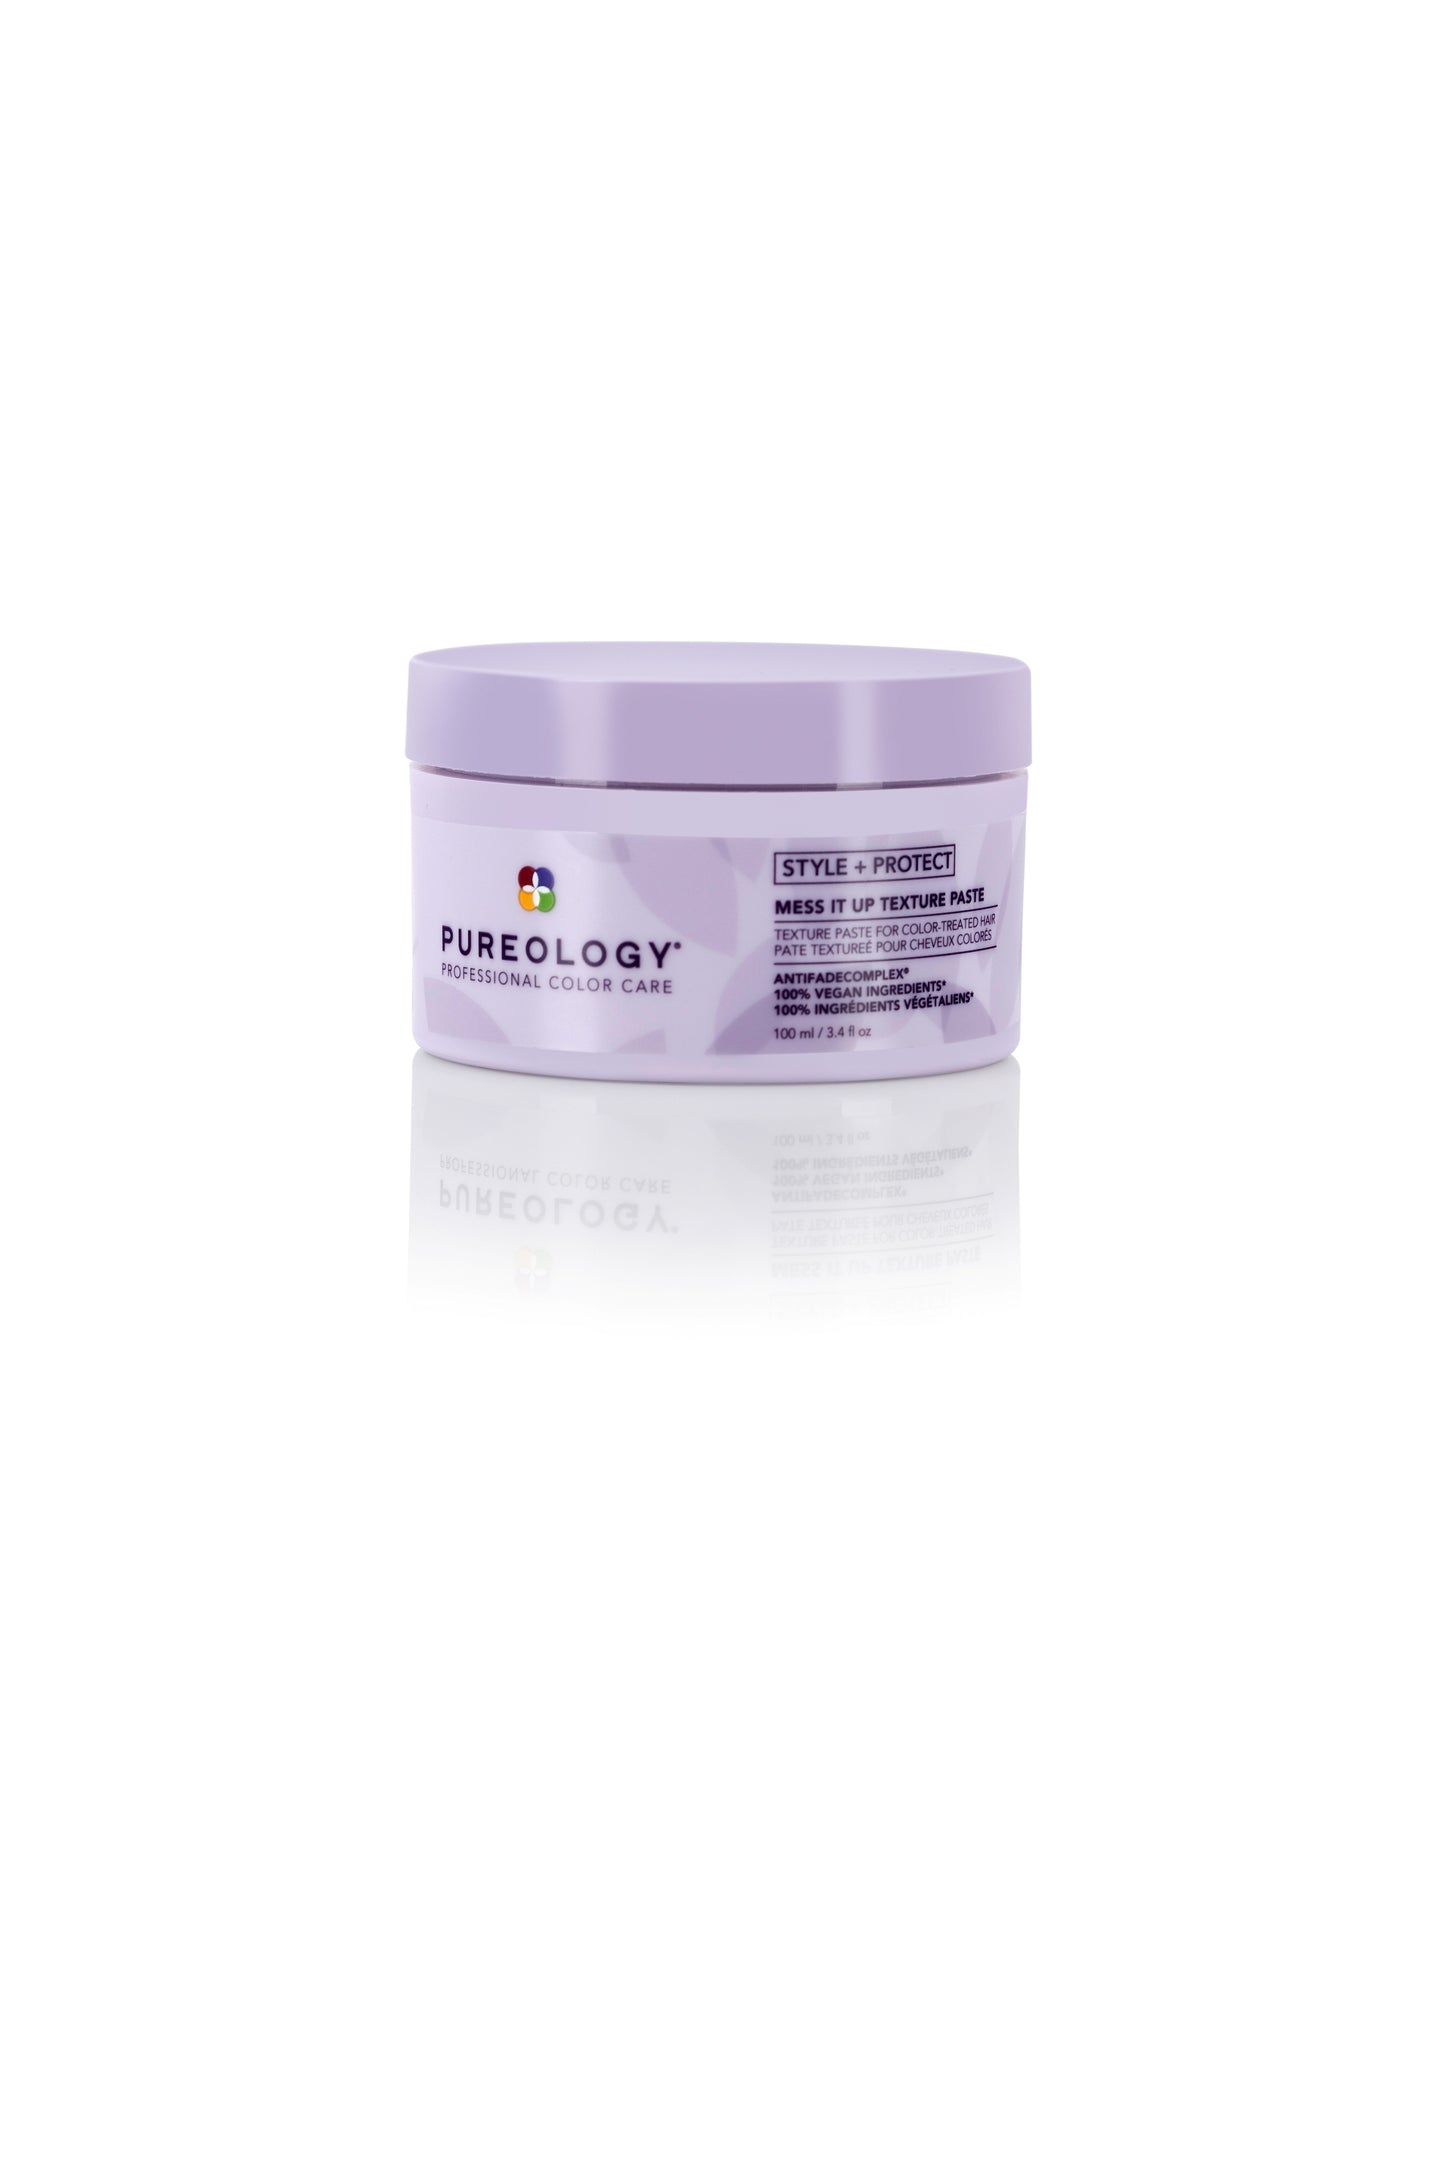 Pureology Style & Protect Mess Up Wax 100g